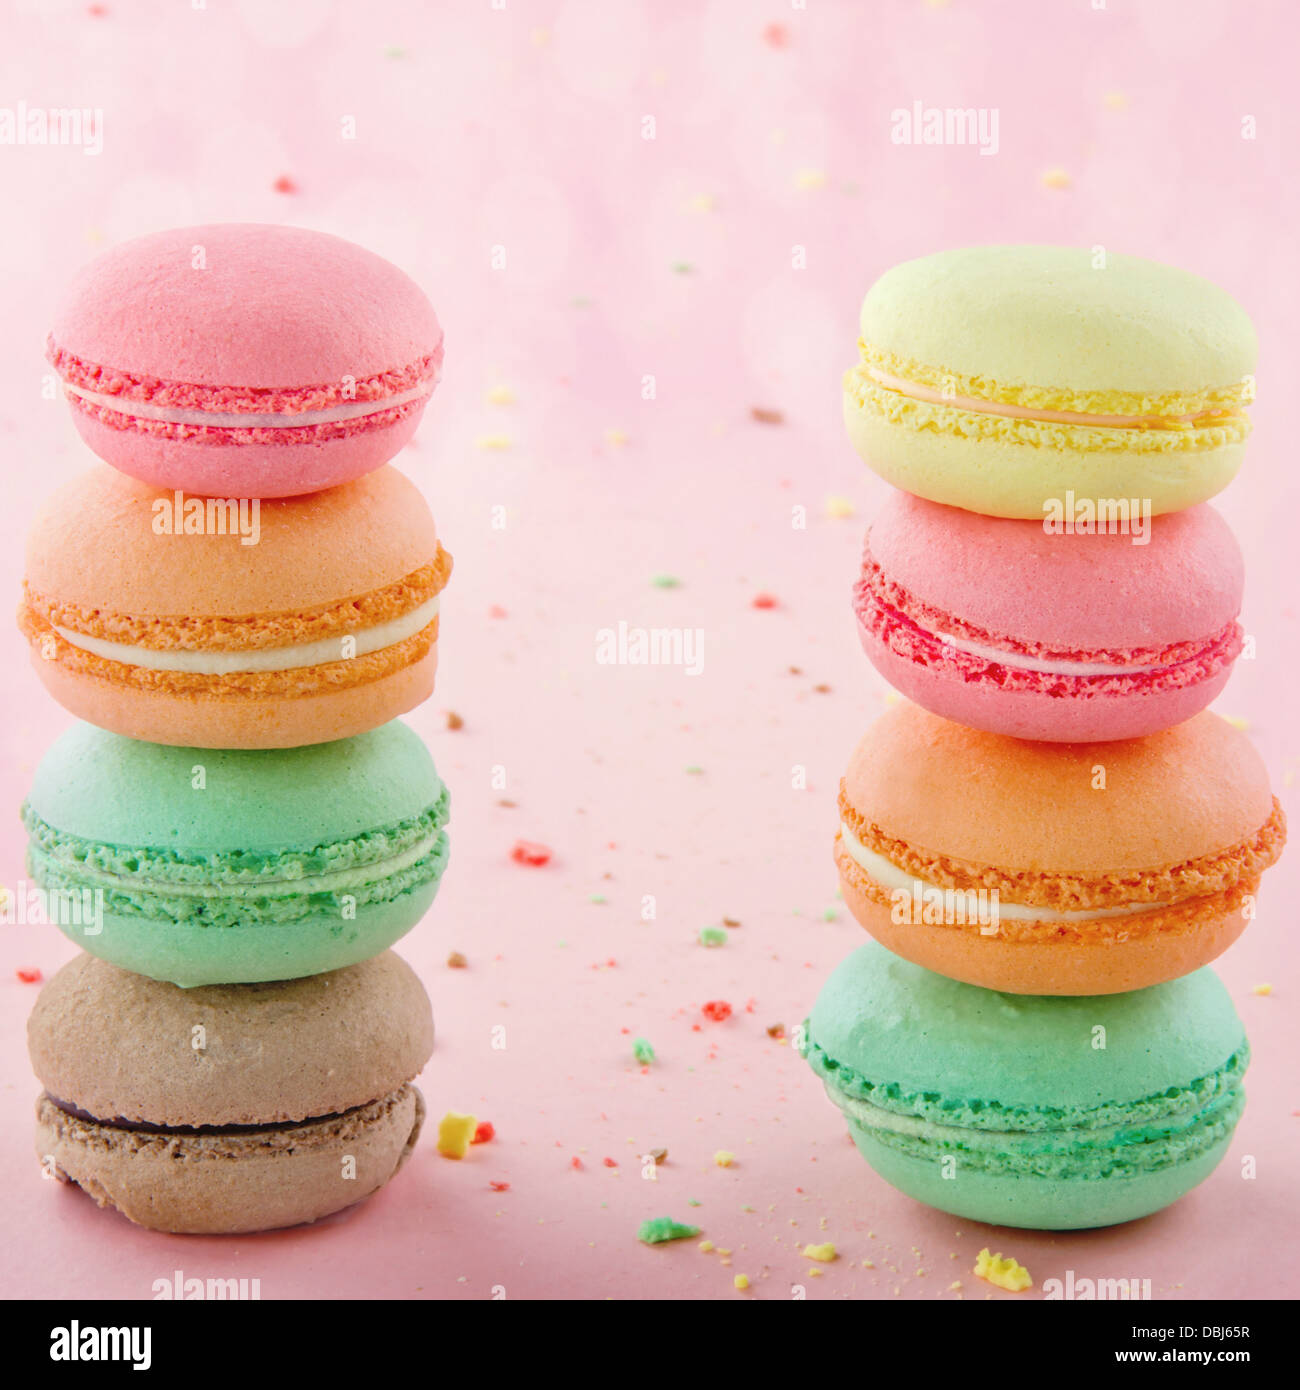 Two piles of colorful macaroons on pastel pink background with small ...